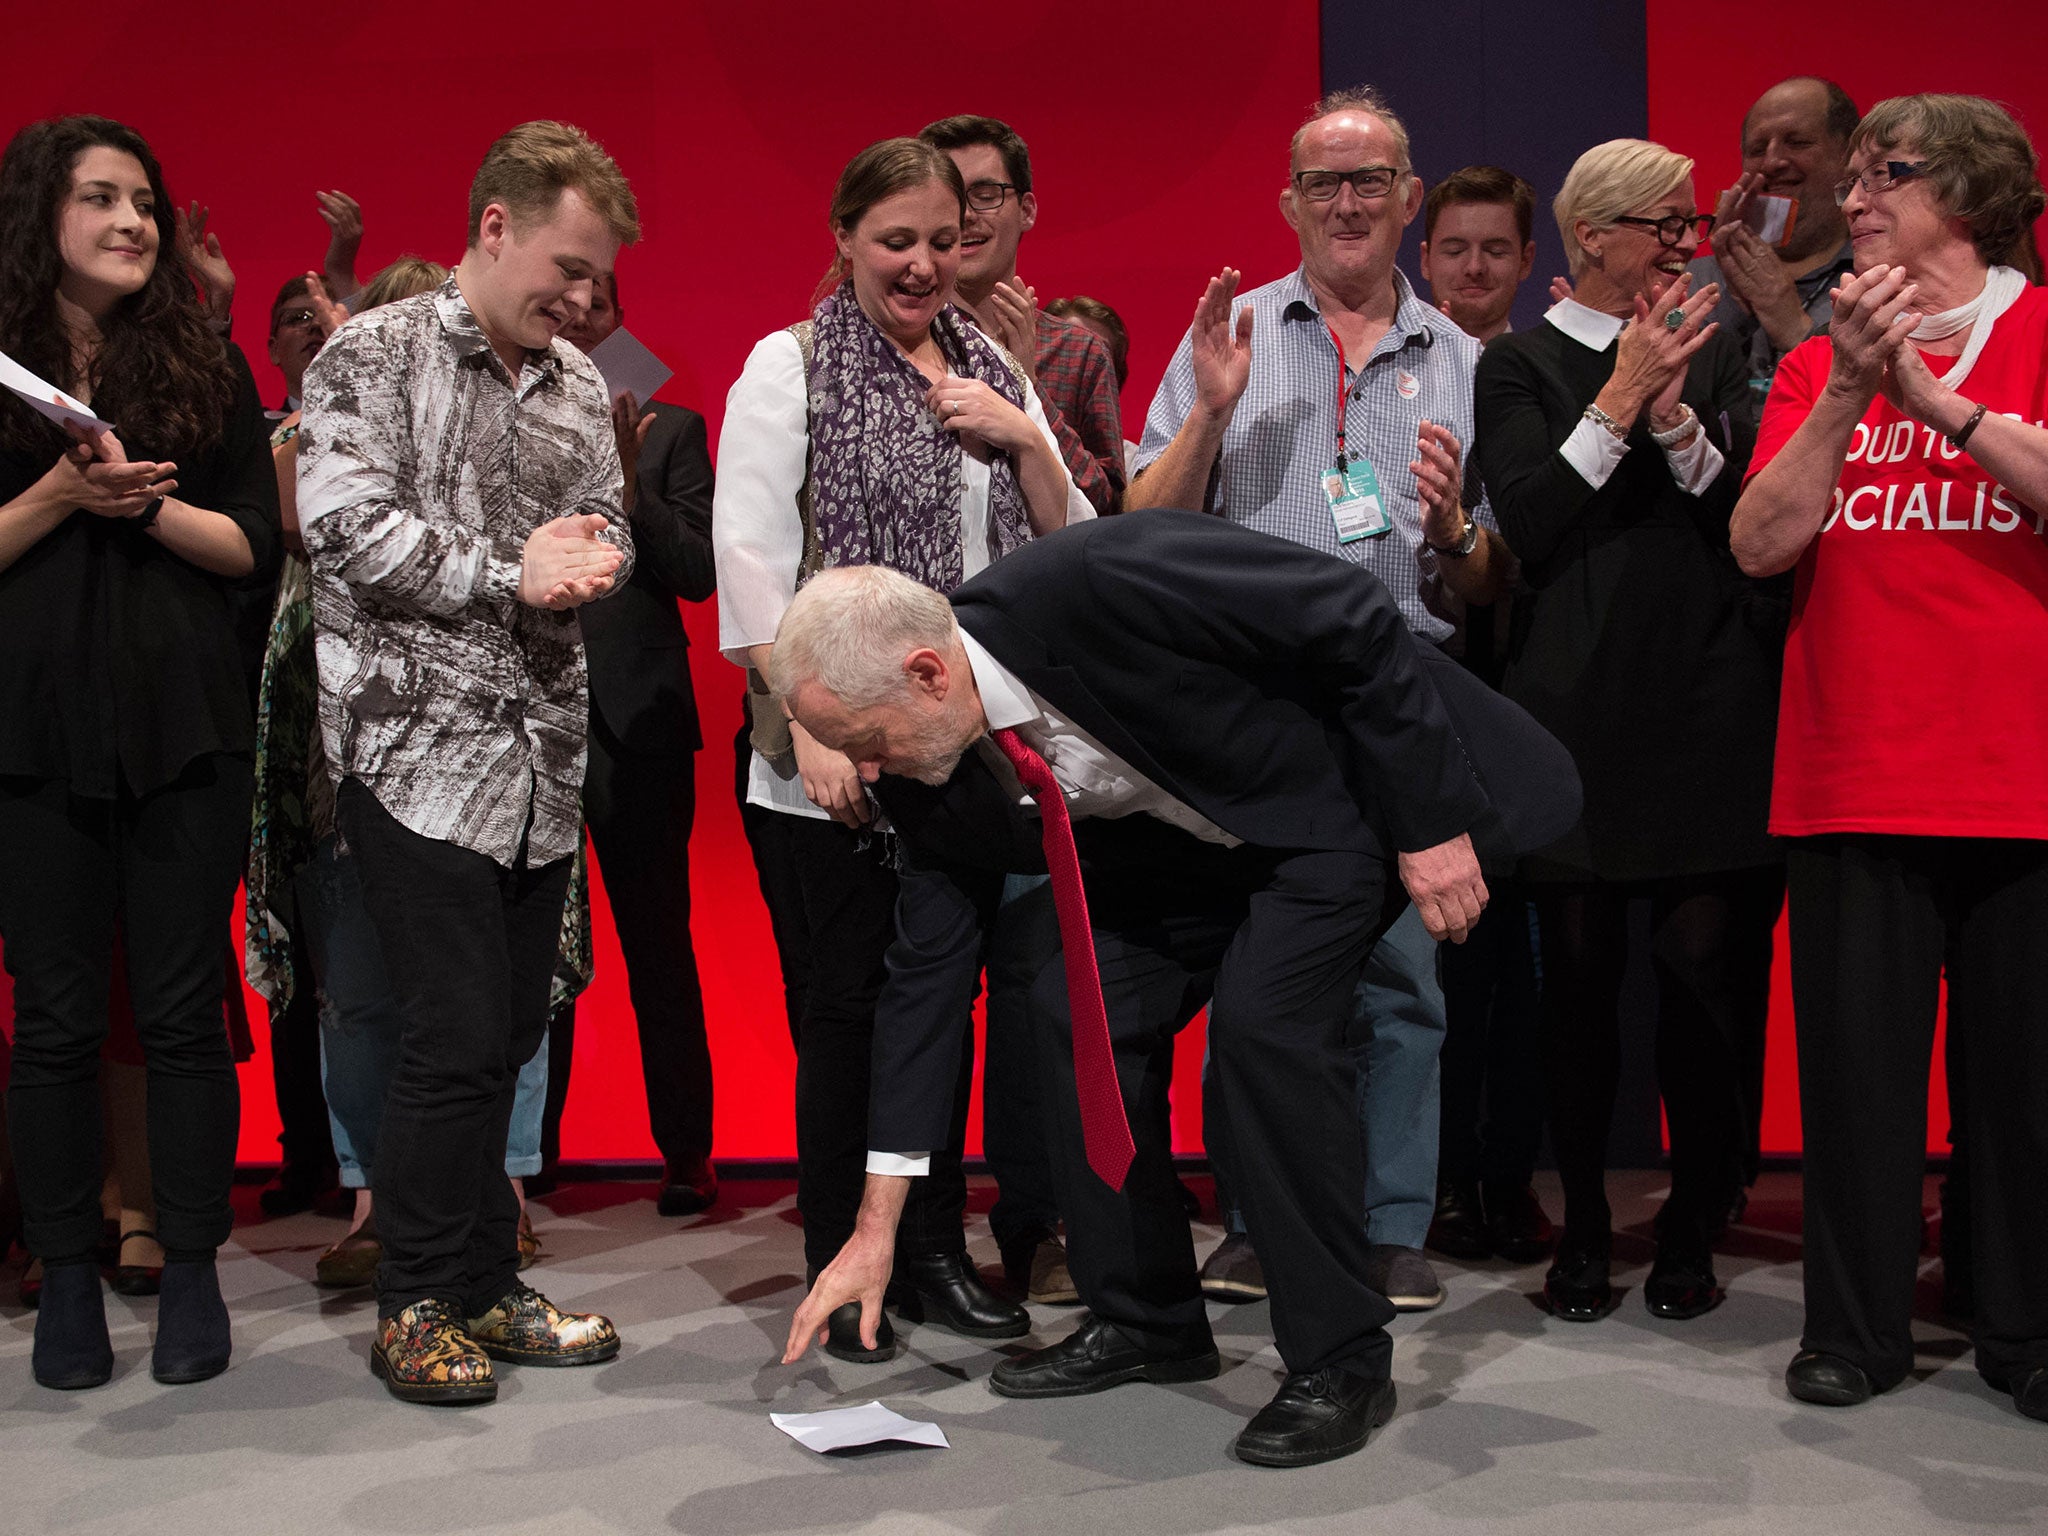 The Labour leader is applauded following his keynote speech on the final day of the Labour Party conference in Liverpool